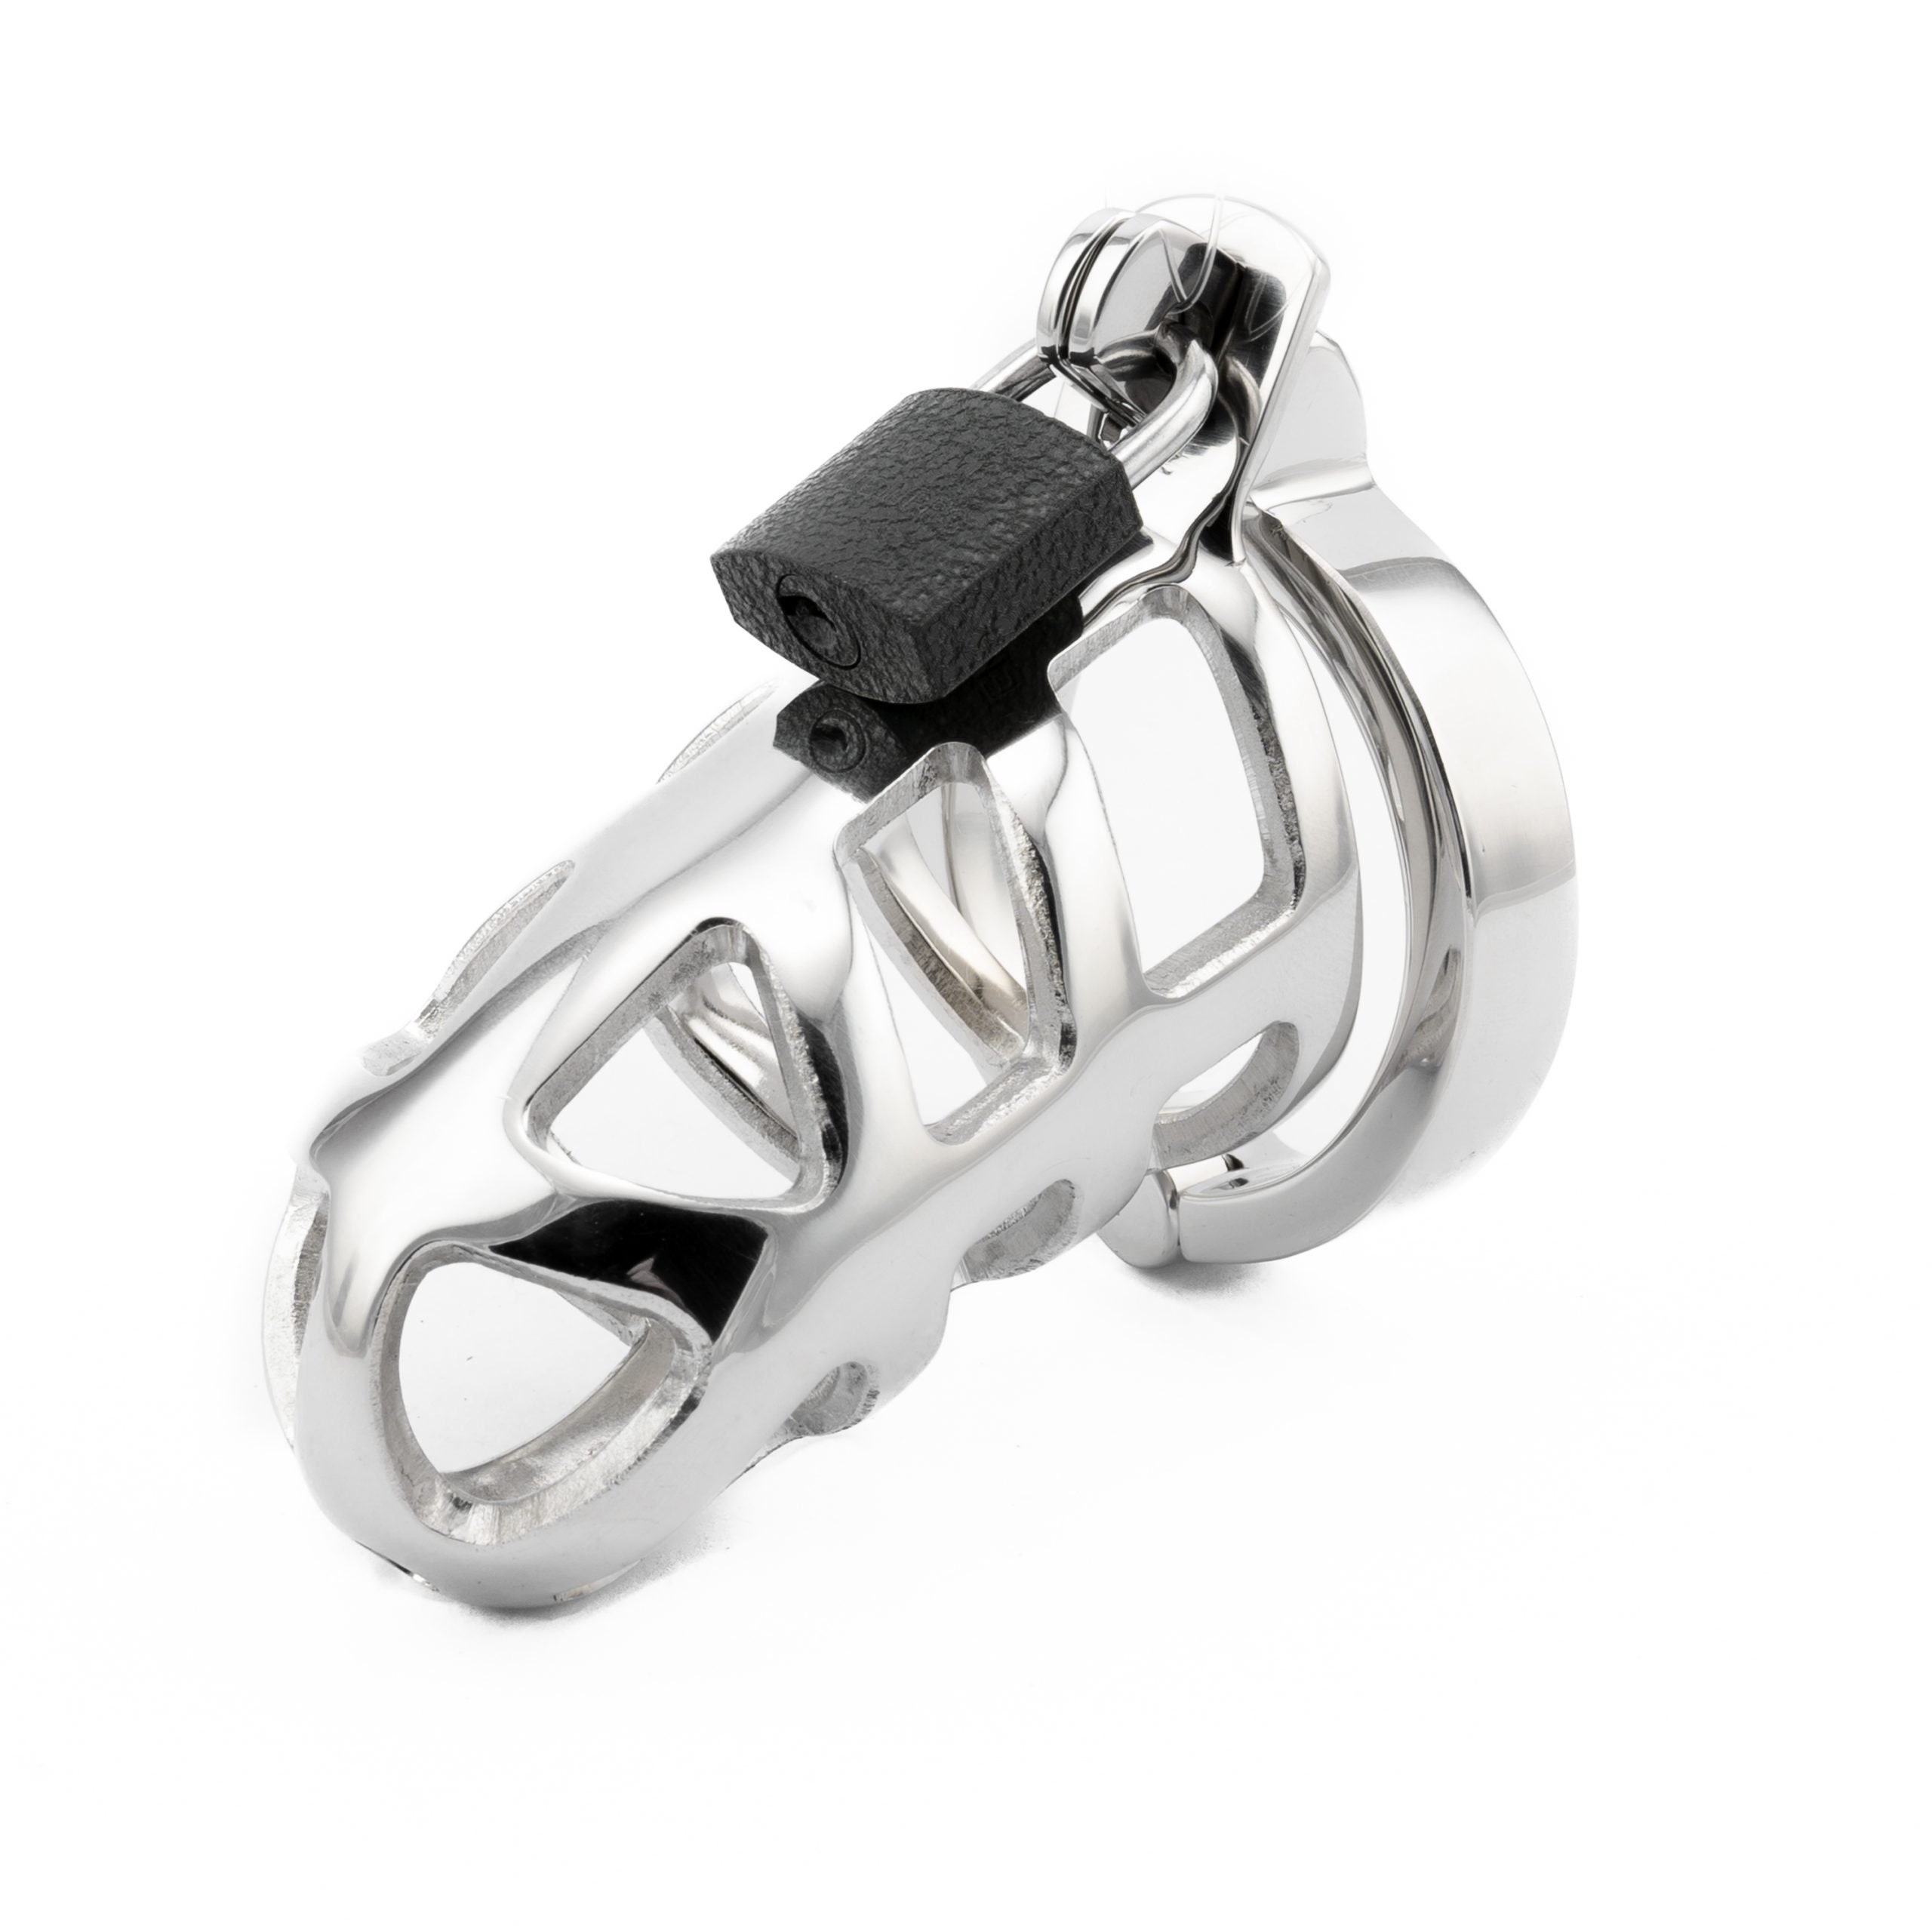 Brutal Chastity Cage Mens Stainless Steel Chastity Device